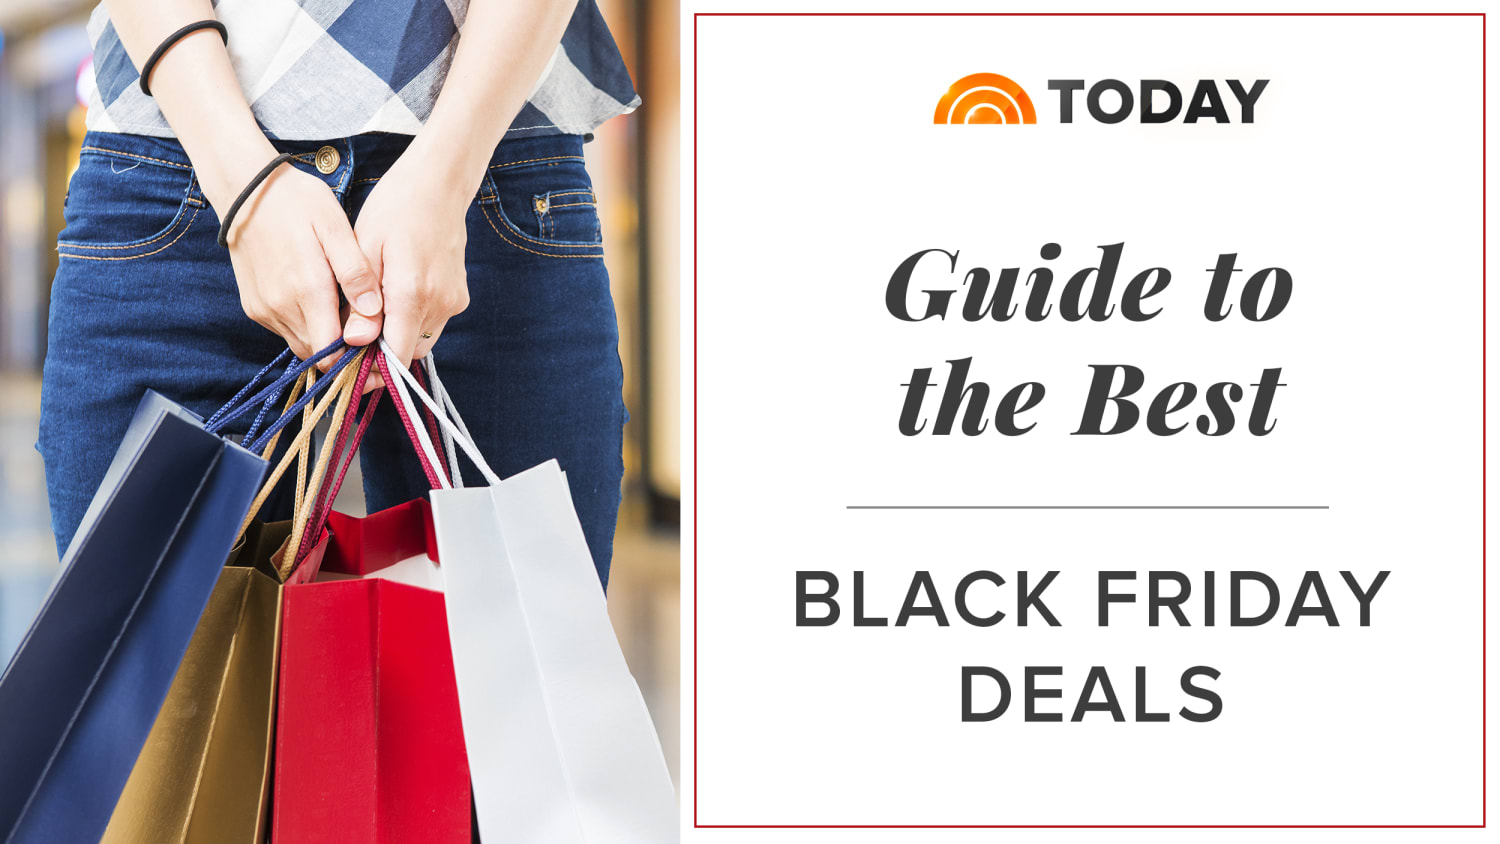 Best Black Friday Deals on Amazon, Target and more 2017 - TODAY.com - What Time Can You Shop Target Black Friday Online